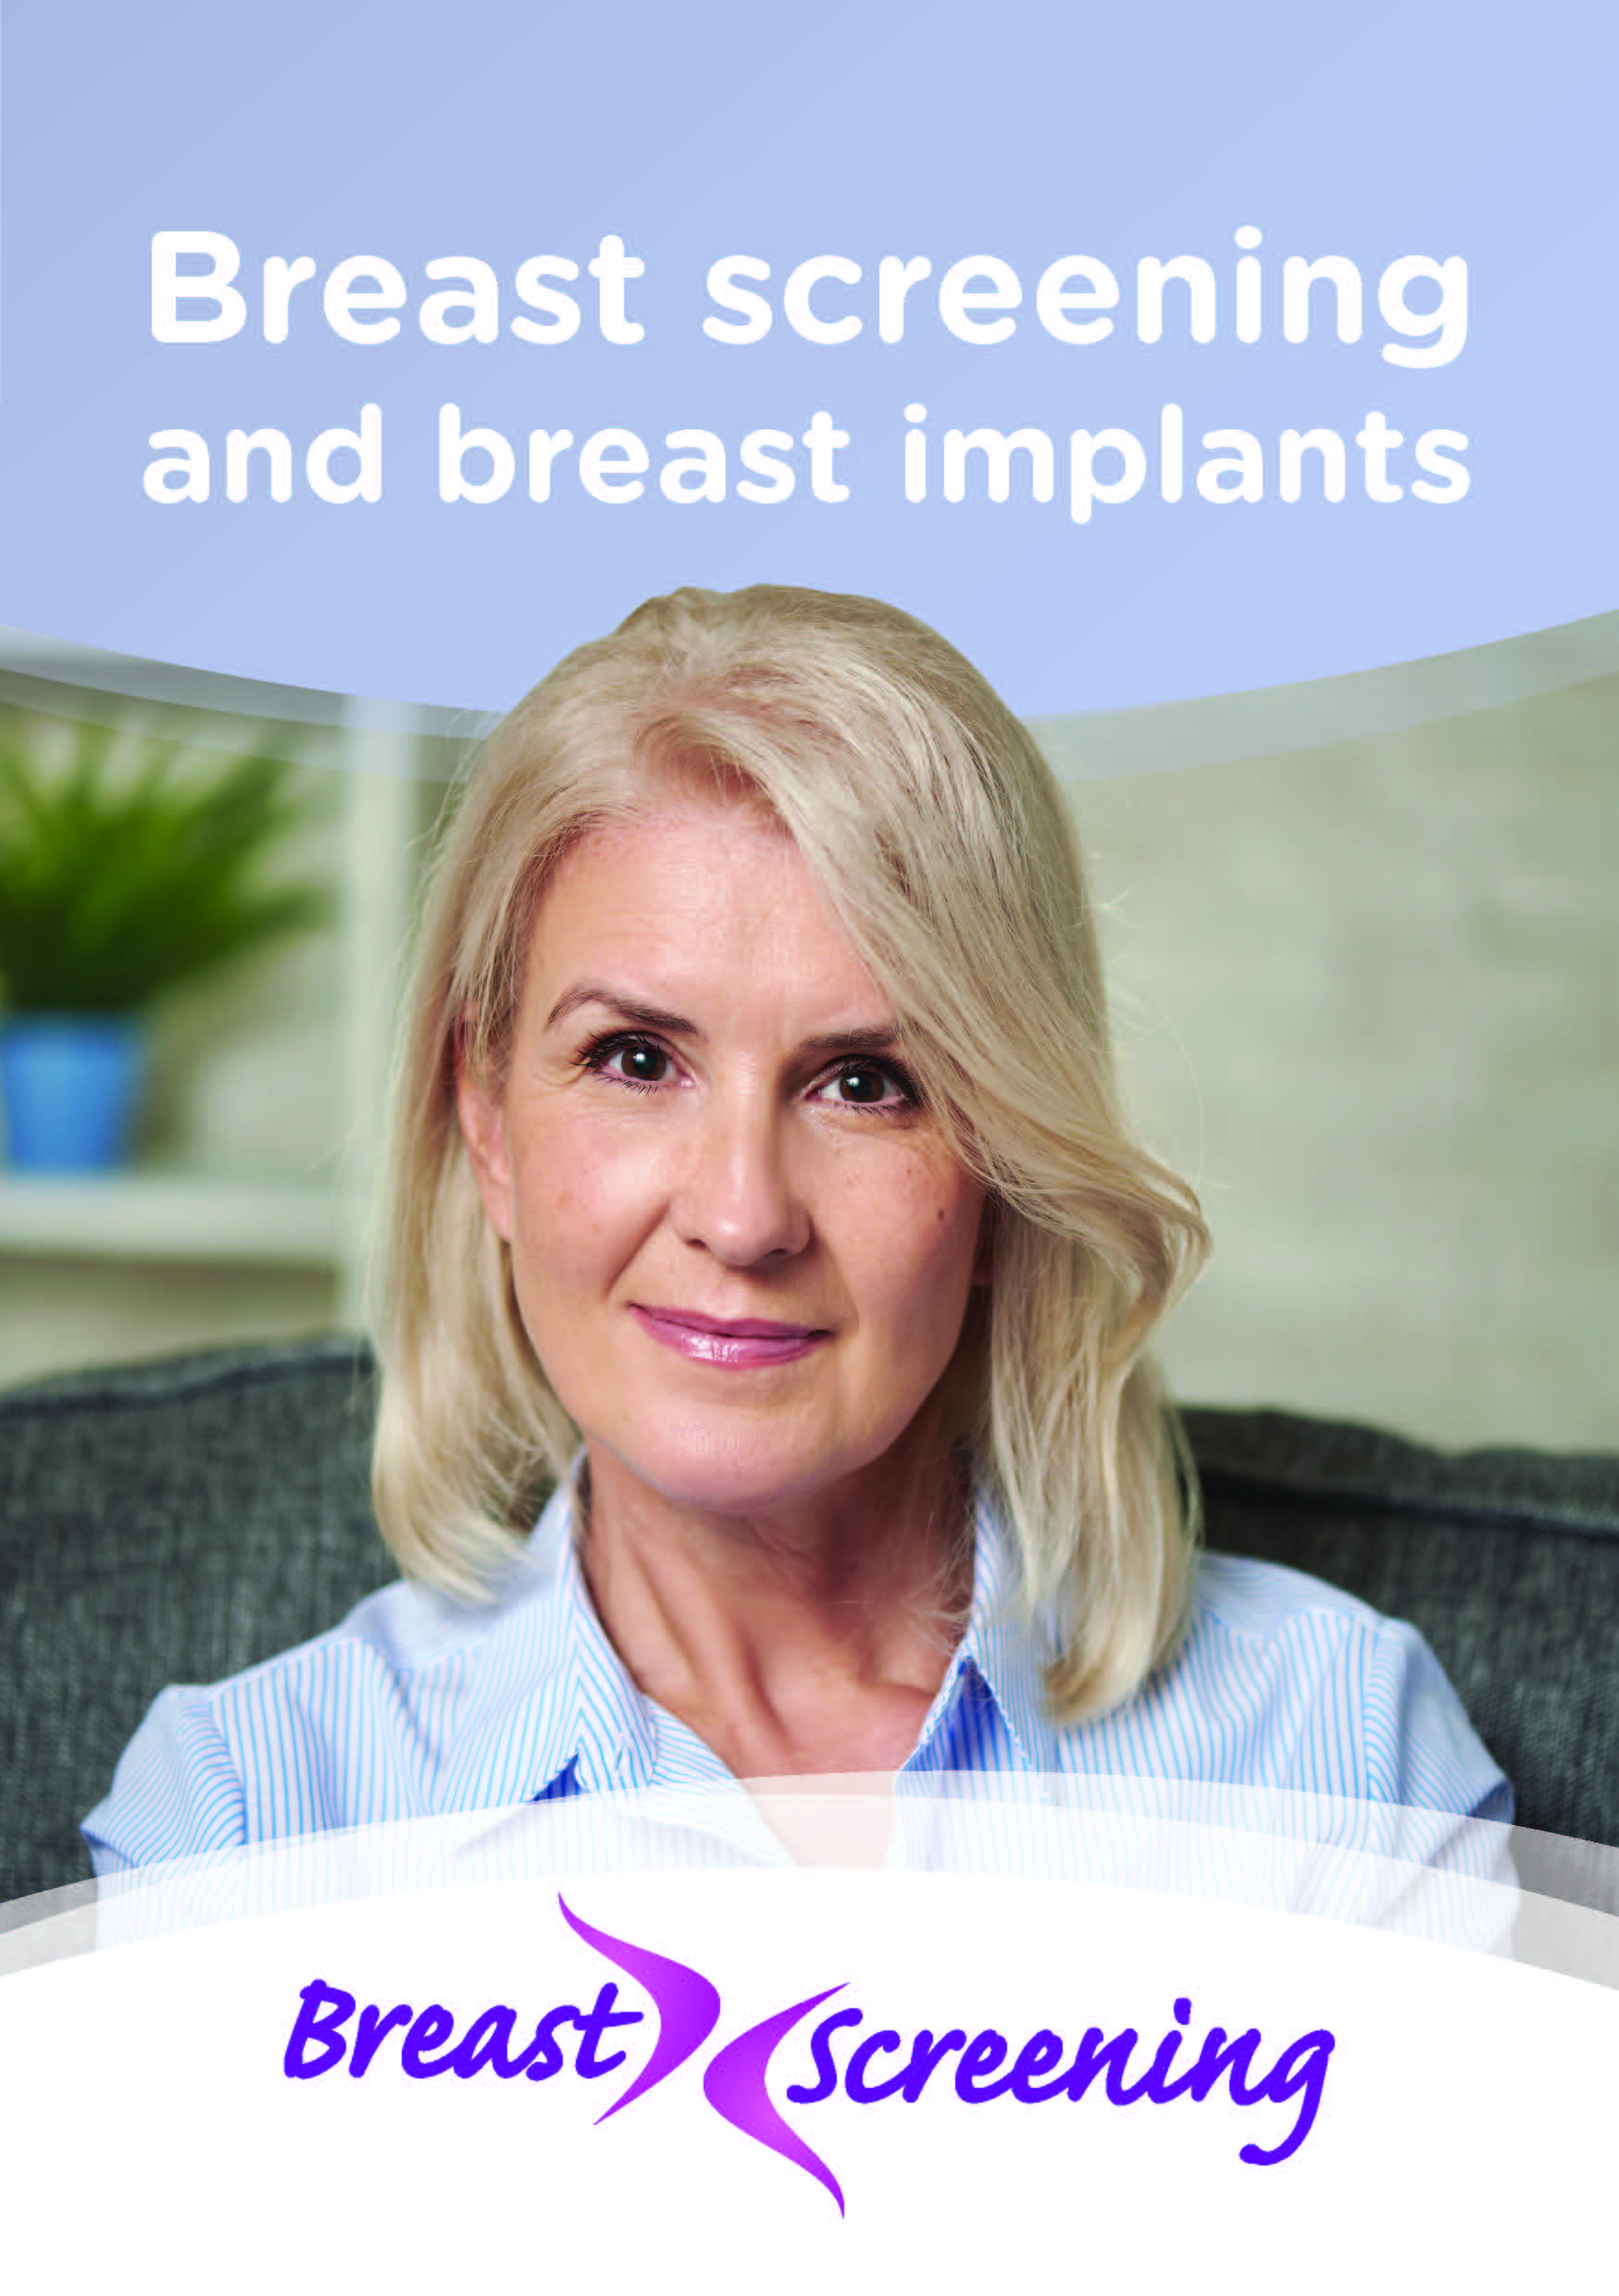 Cover of leaflet Breast screening and breast implants